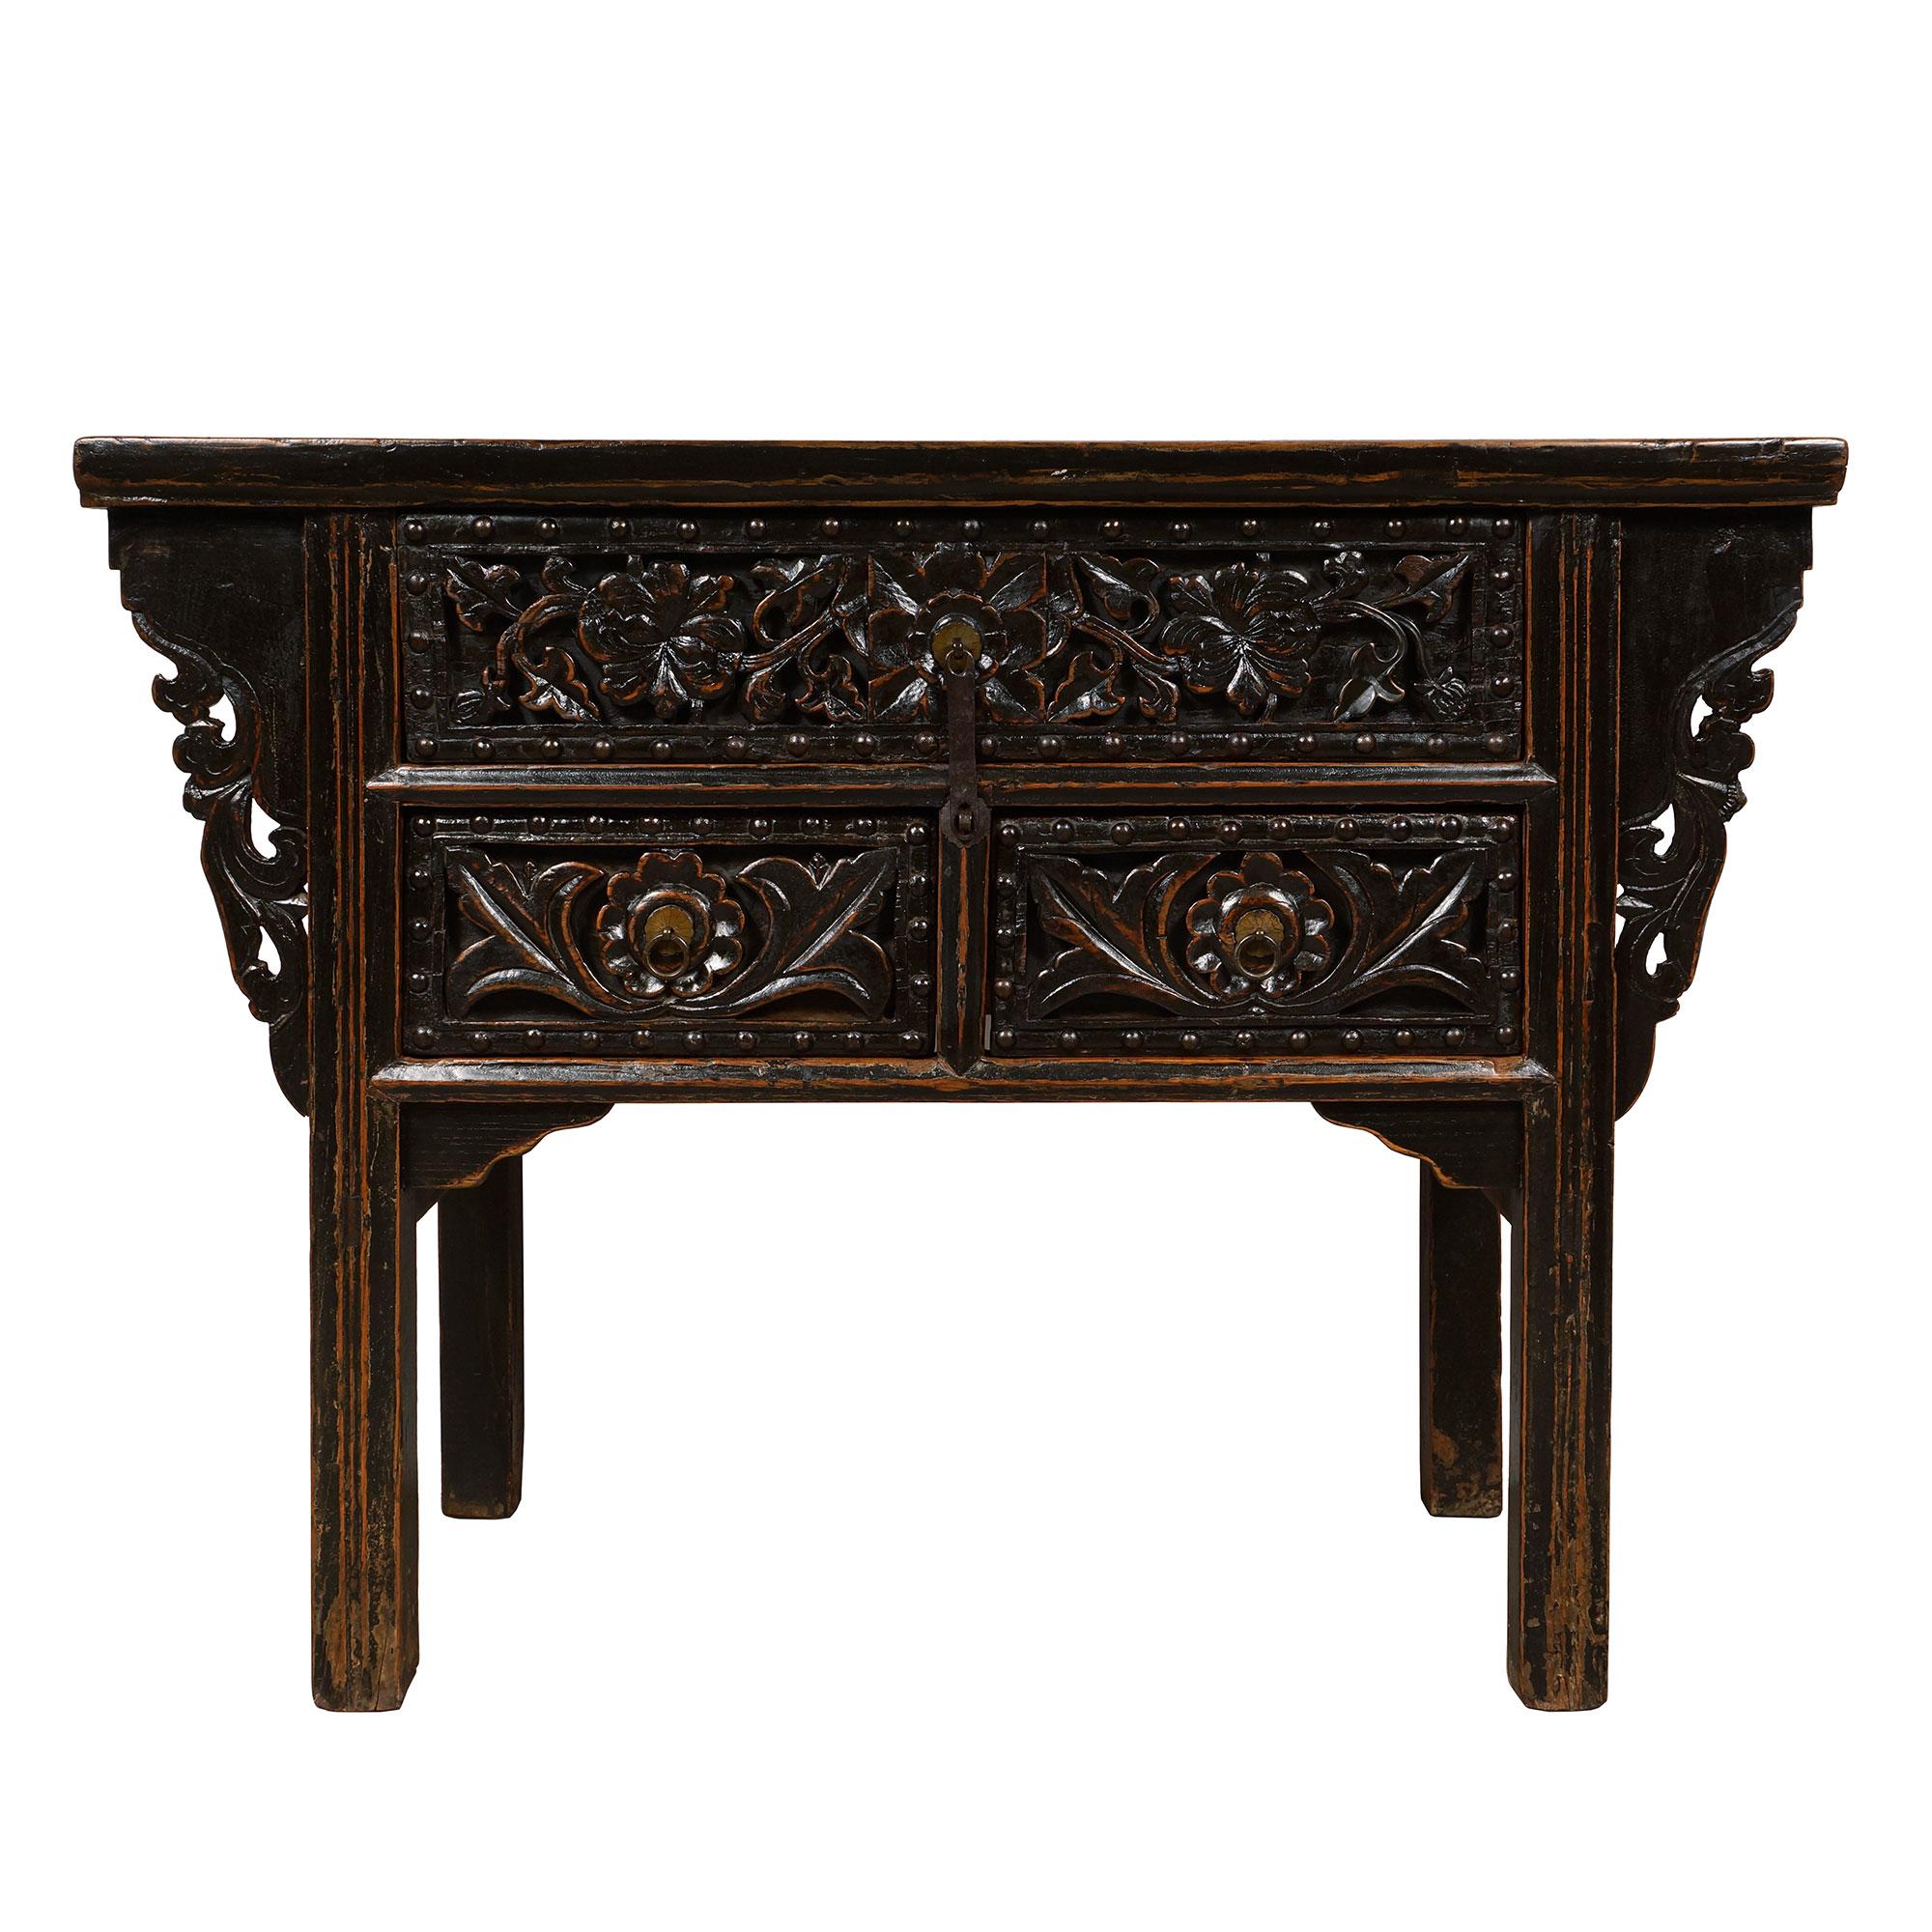 Chinese Export 19th Century Antique Chinese Carved Shan xi Console Table/Sideboard For Sale